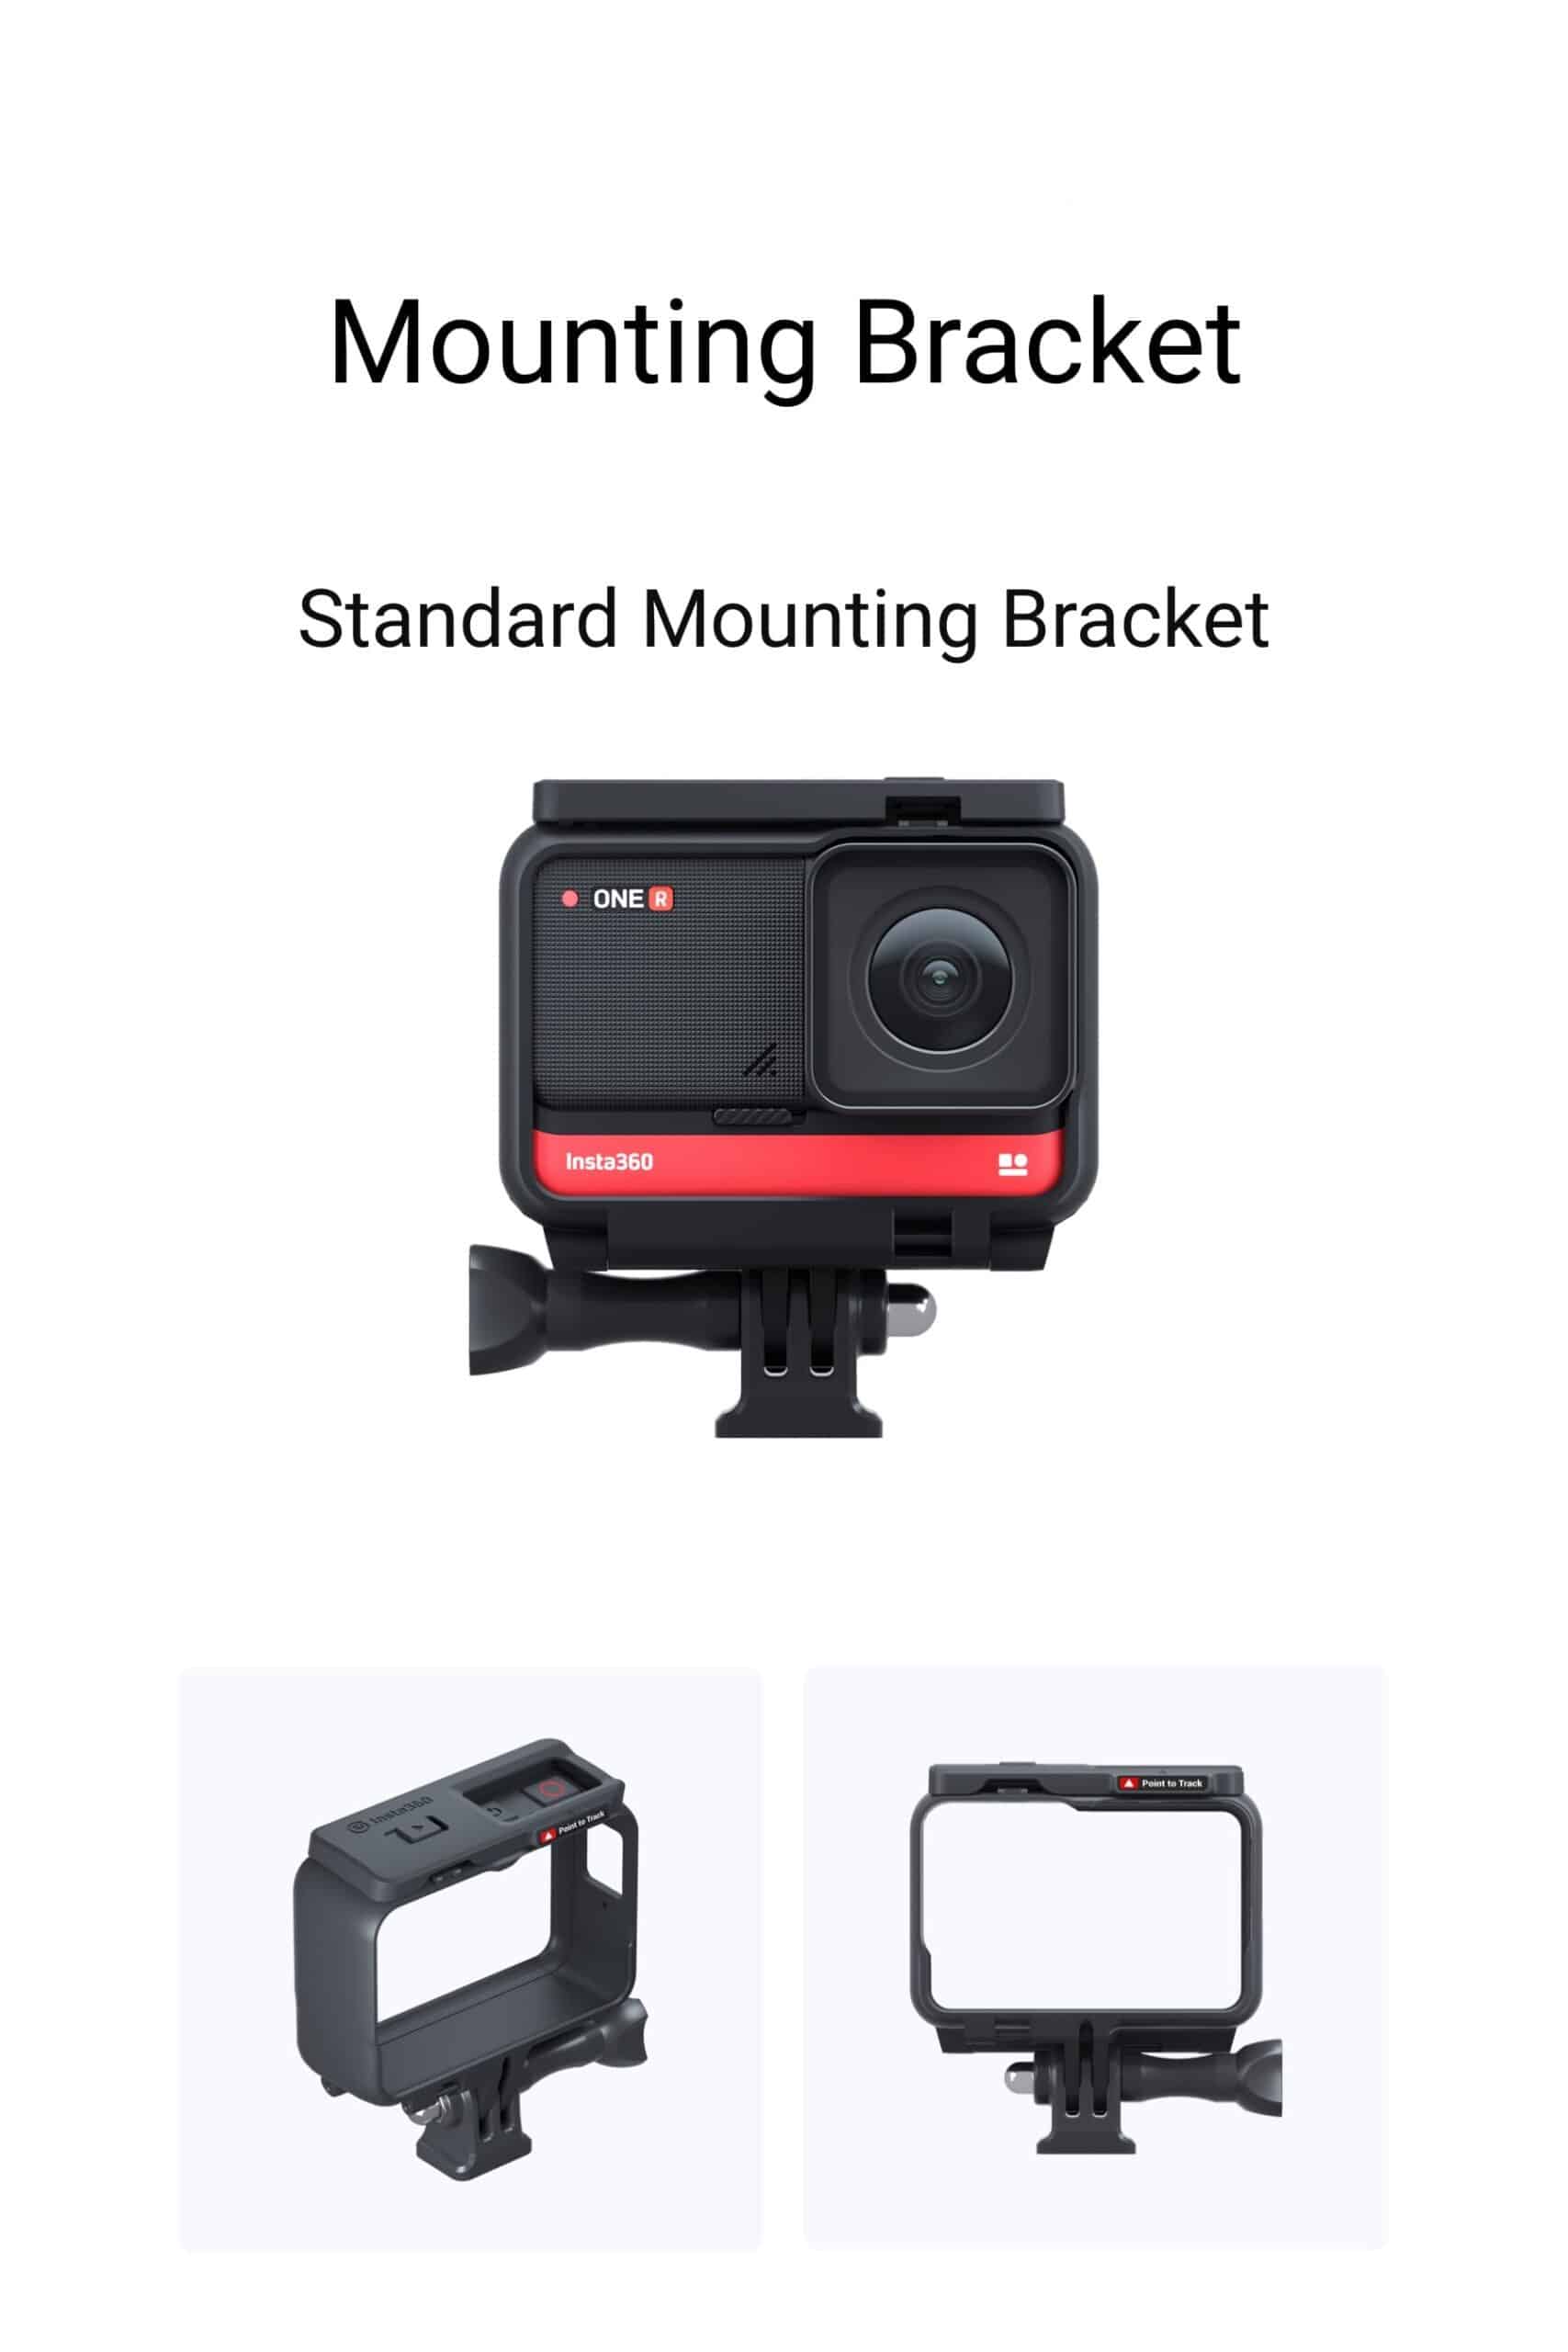 Standard Mounting Bracket/Accessory Shoe Mounting Bracket for Insta360 ONE R Action Camera Frame Mounting